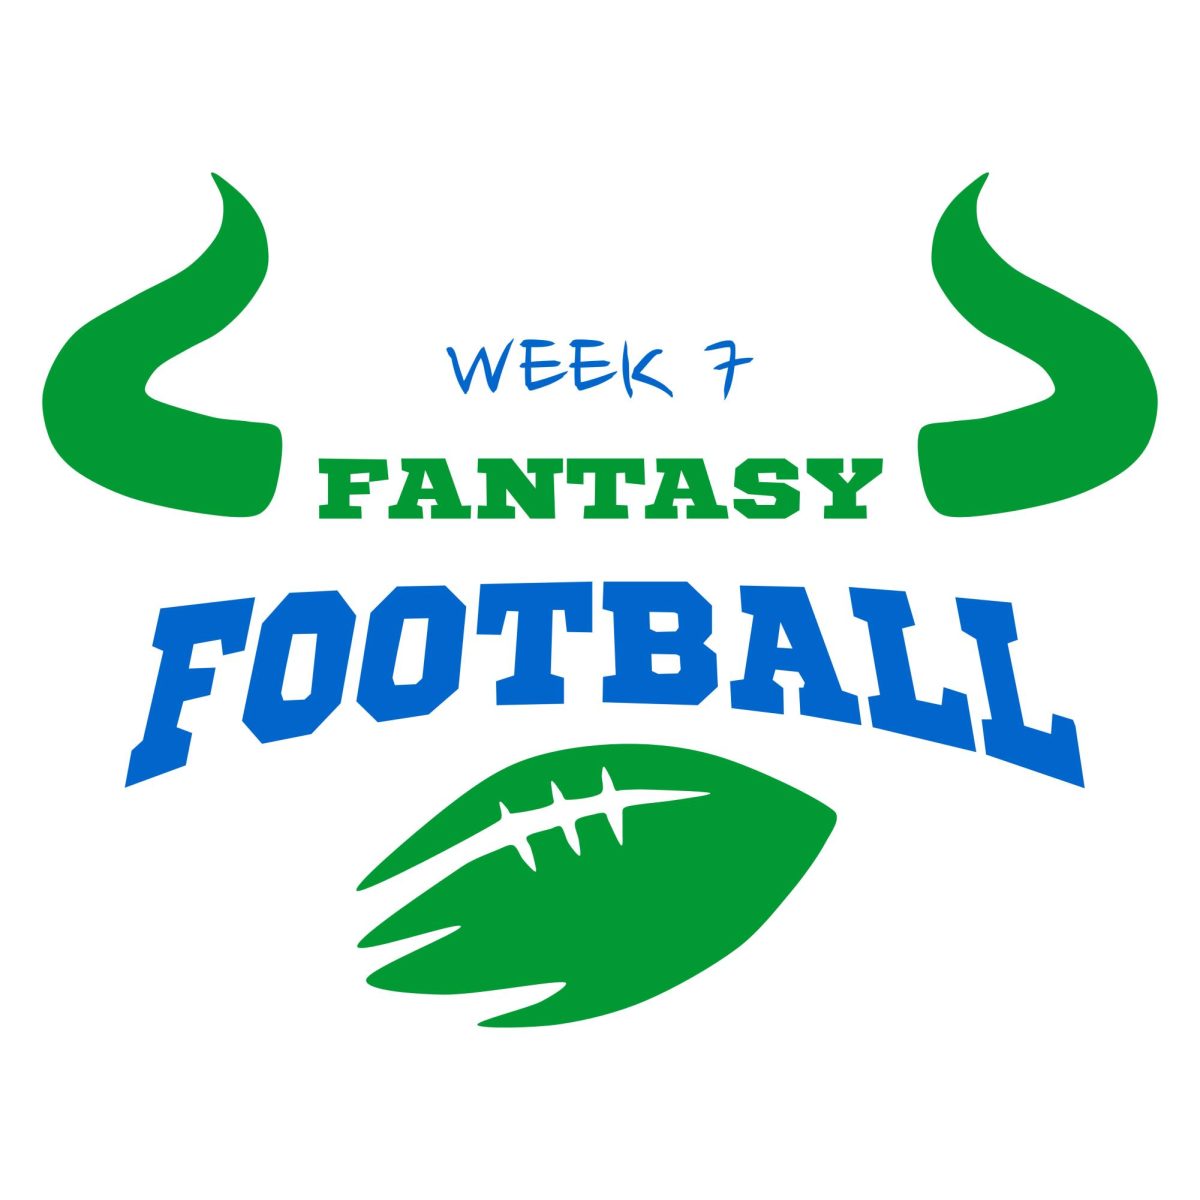 Week 7 fantasy football guide to injuries and updates